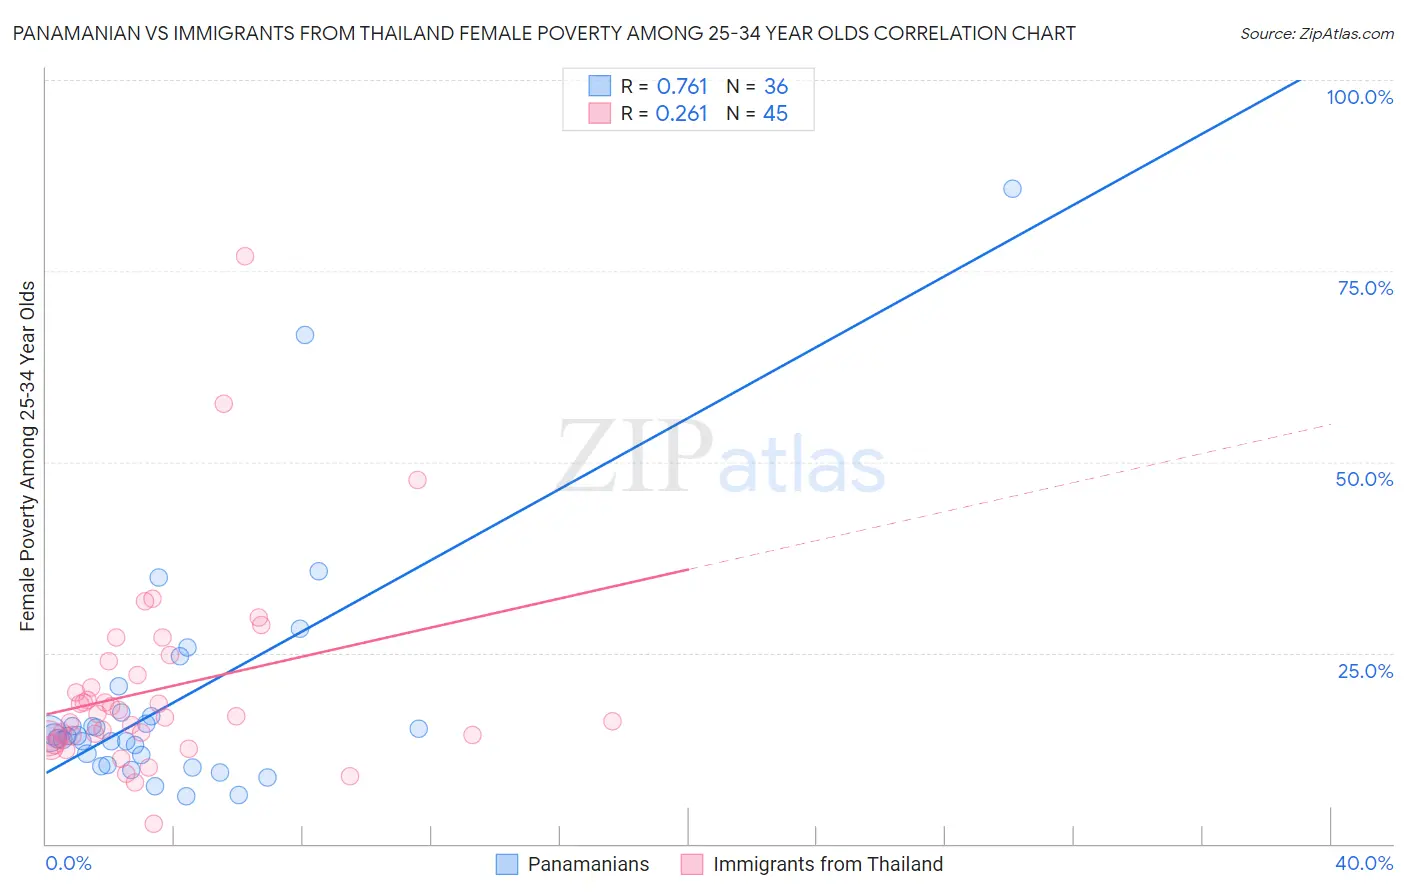 Panamanian vs Immigrants from Thailand Female Poverty Among 25-34 Year Olds